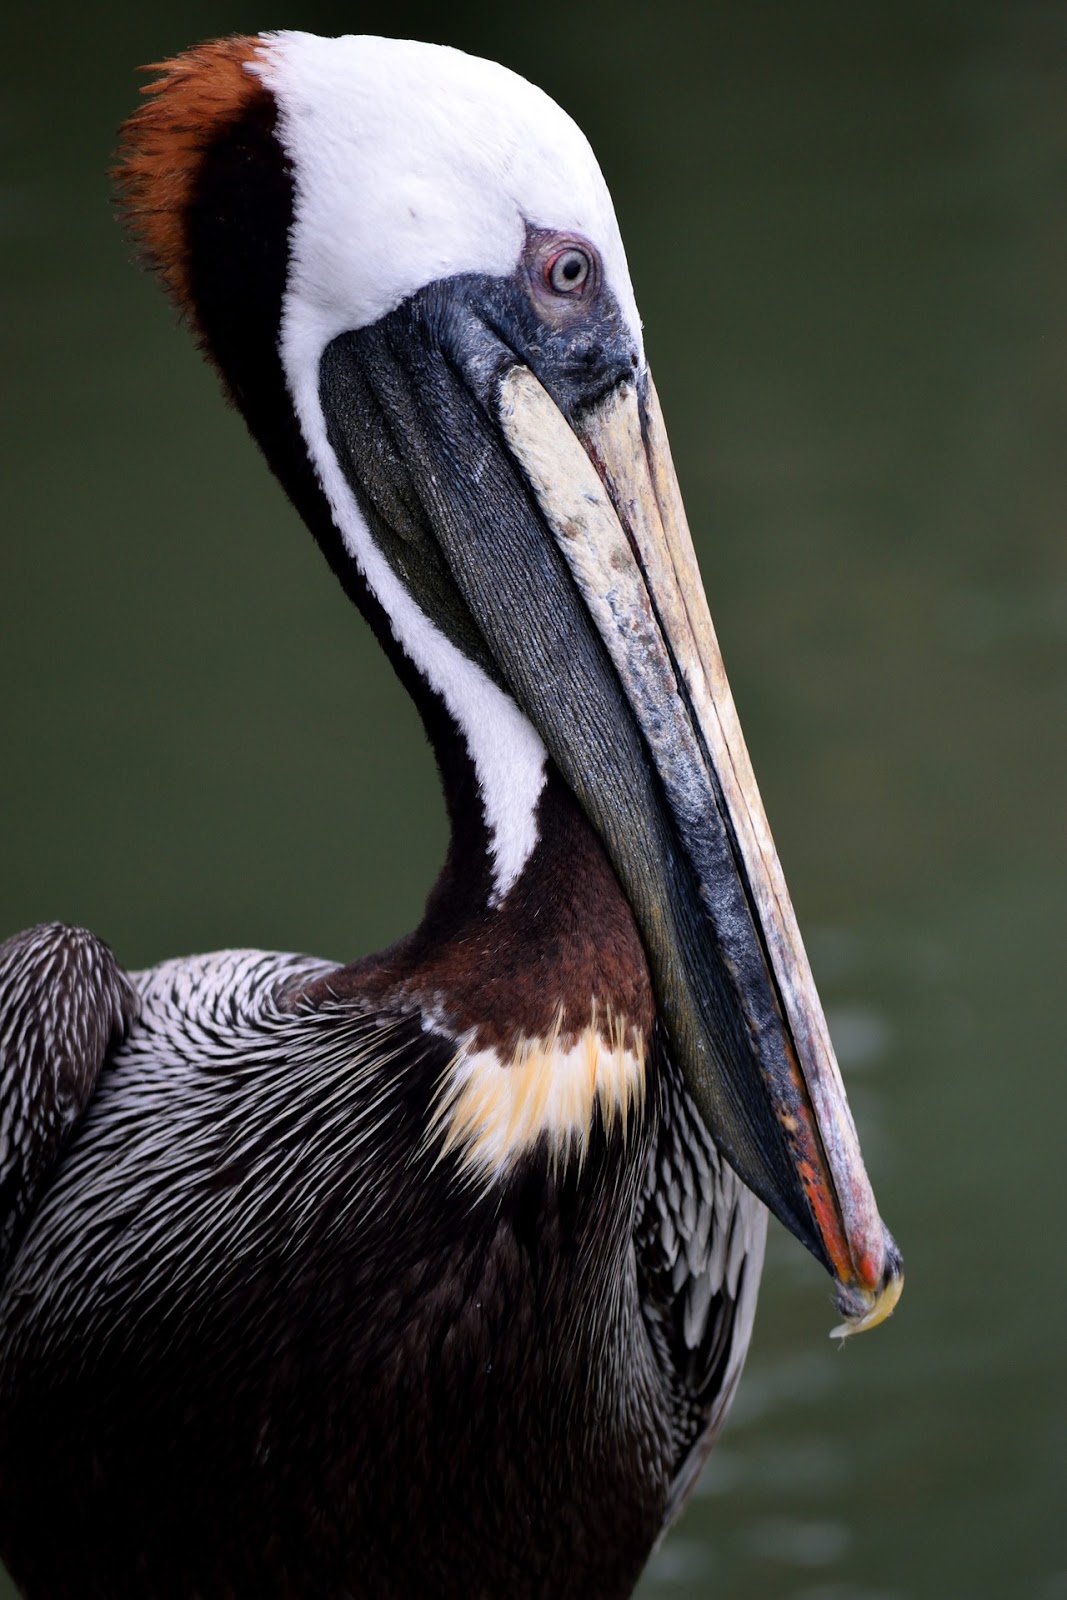 Picture of a pelican up close.